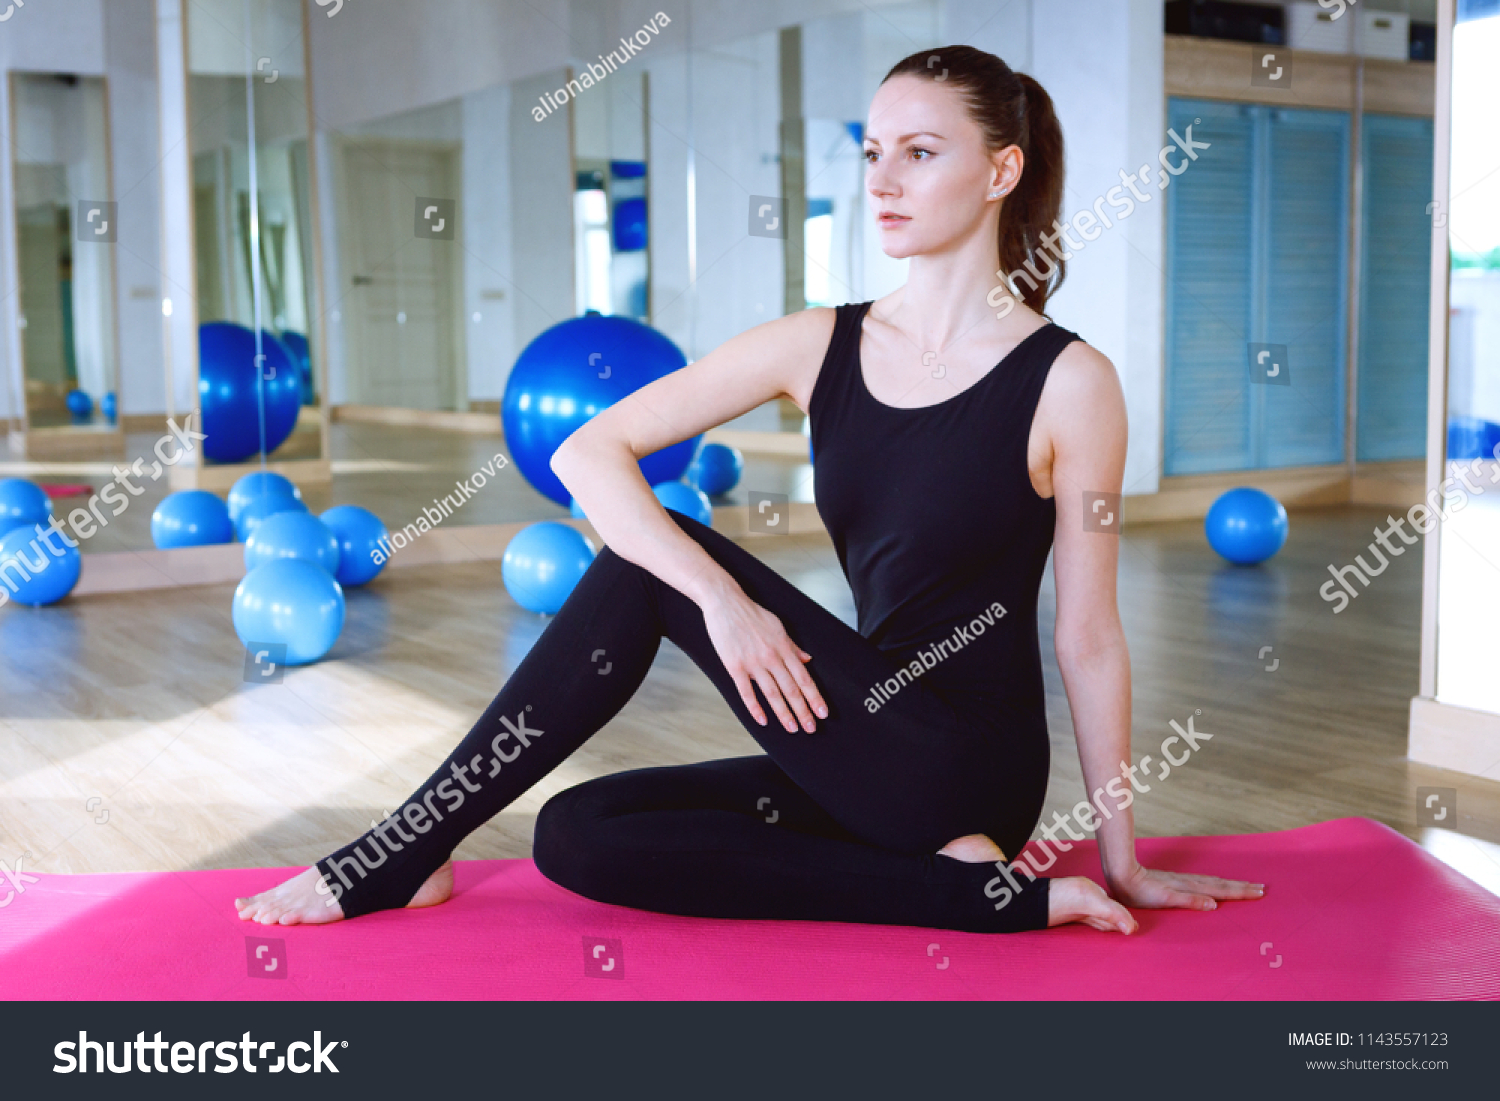 Woman sitting on pink ypga matt and doing exercises in fitness club gym, wearing black overall jumpsuit #1143557123